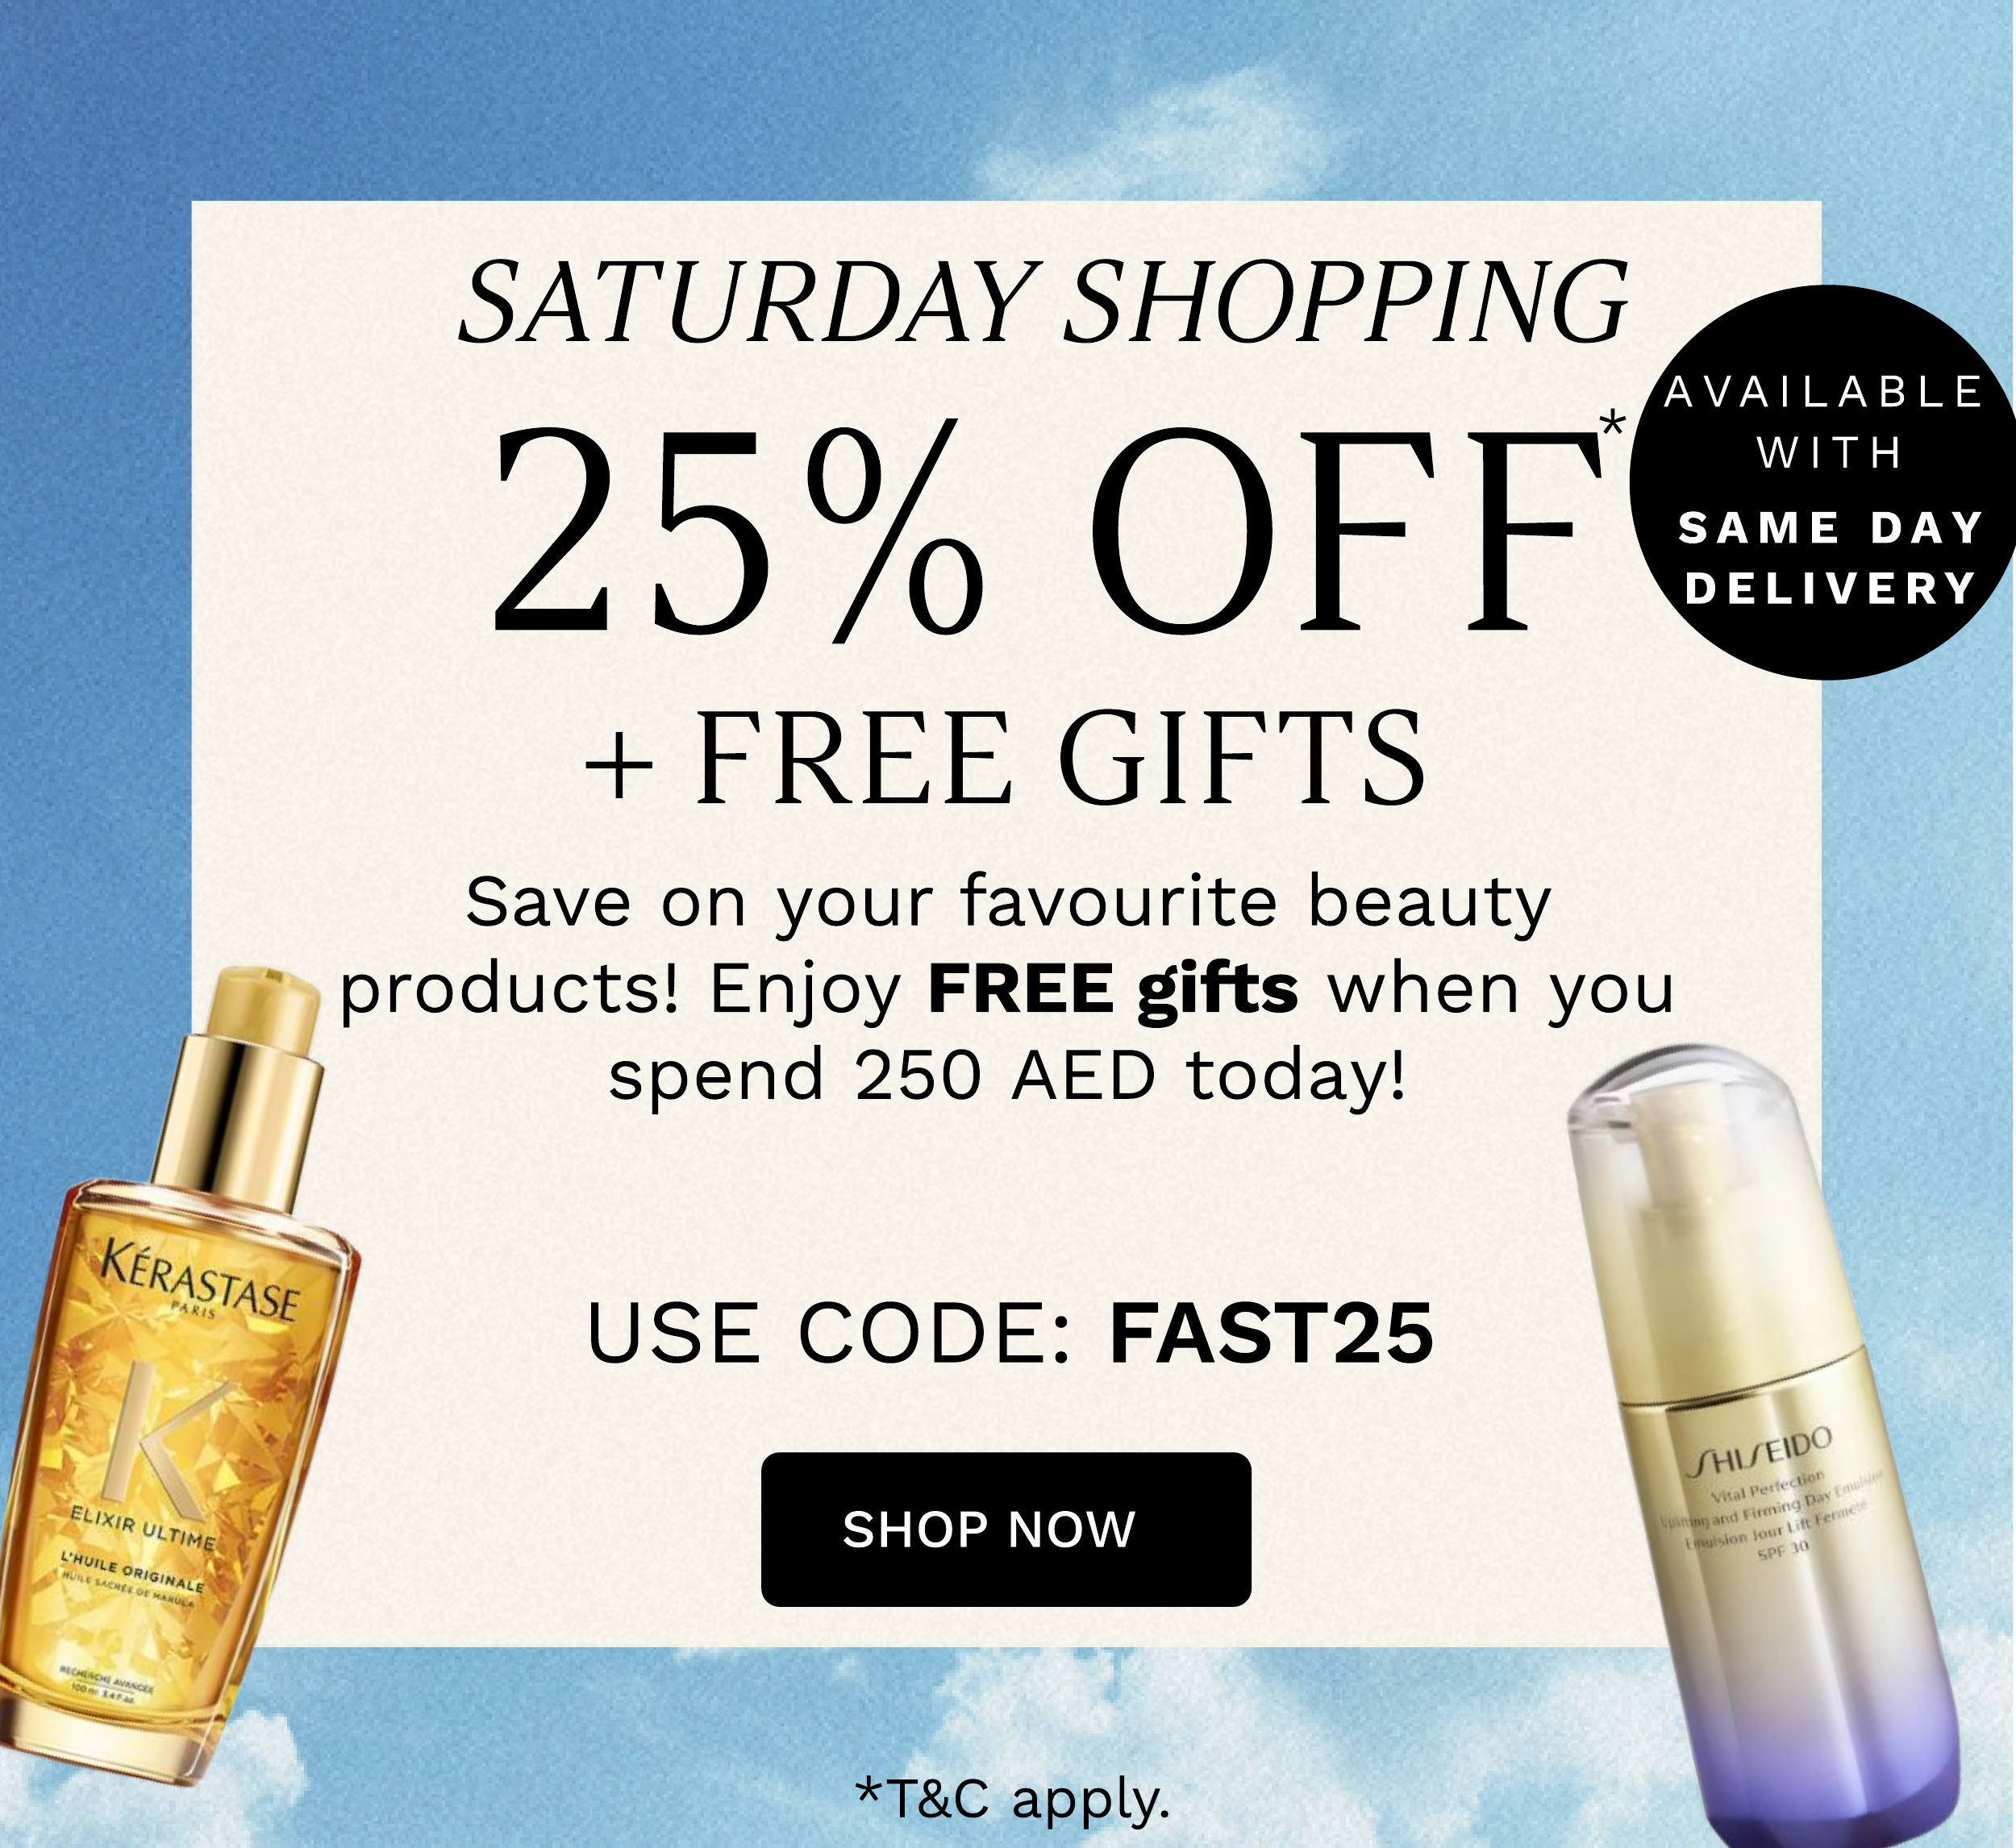 SATURDAY SHOPPING 25% OFF FREE GIFTS Save on your favourite beauty i products! Enjoy FREE gifts when you AVAILABLE spend 250 AED today! P % USE CODE: FAST25 SHOP NOW *TC apply. 